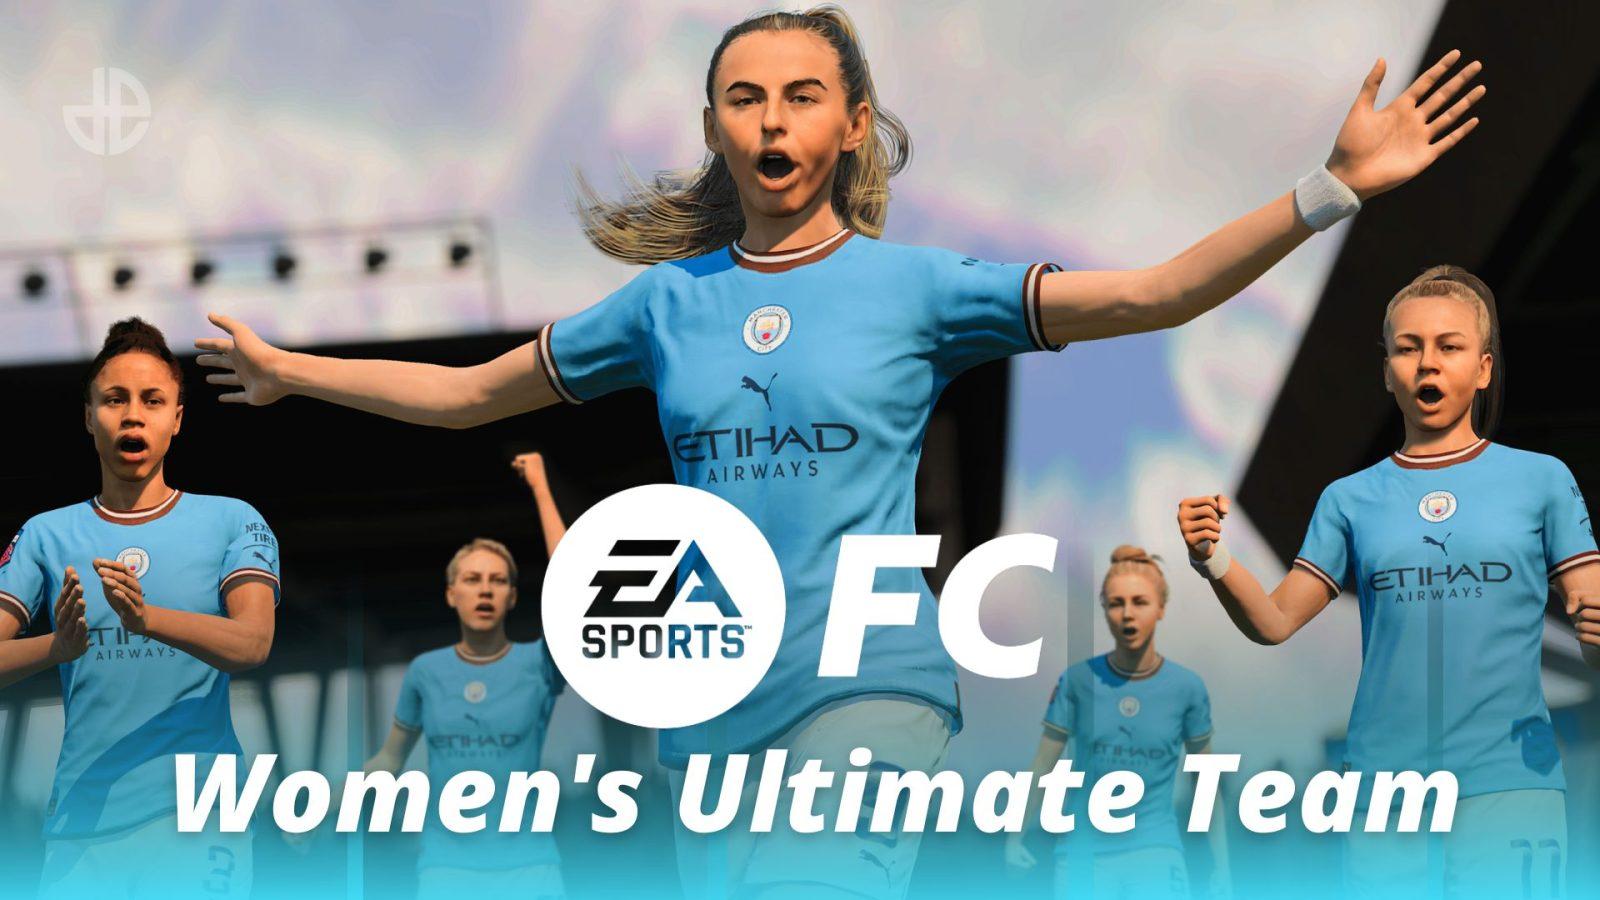 EA Sports FC 24 Cover Star Could Be From Manchester City, Claims